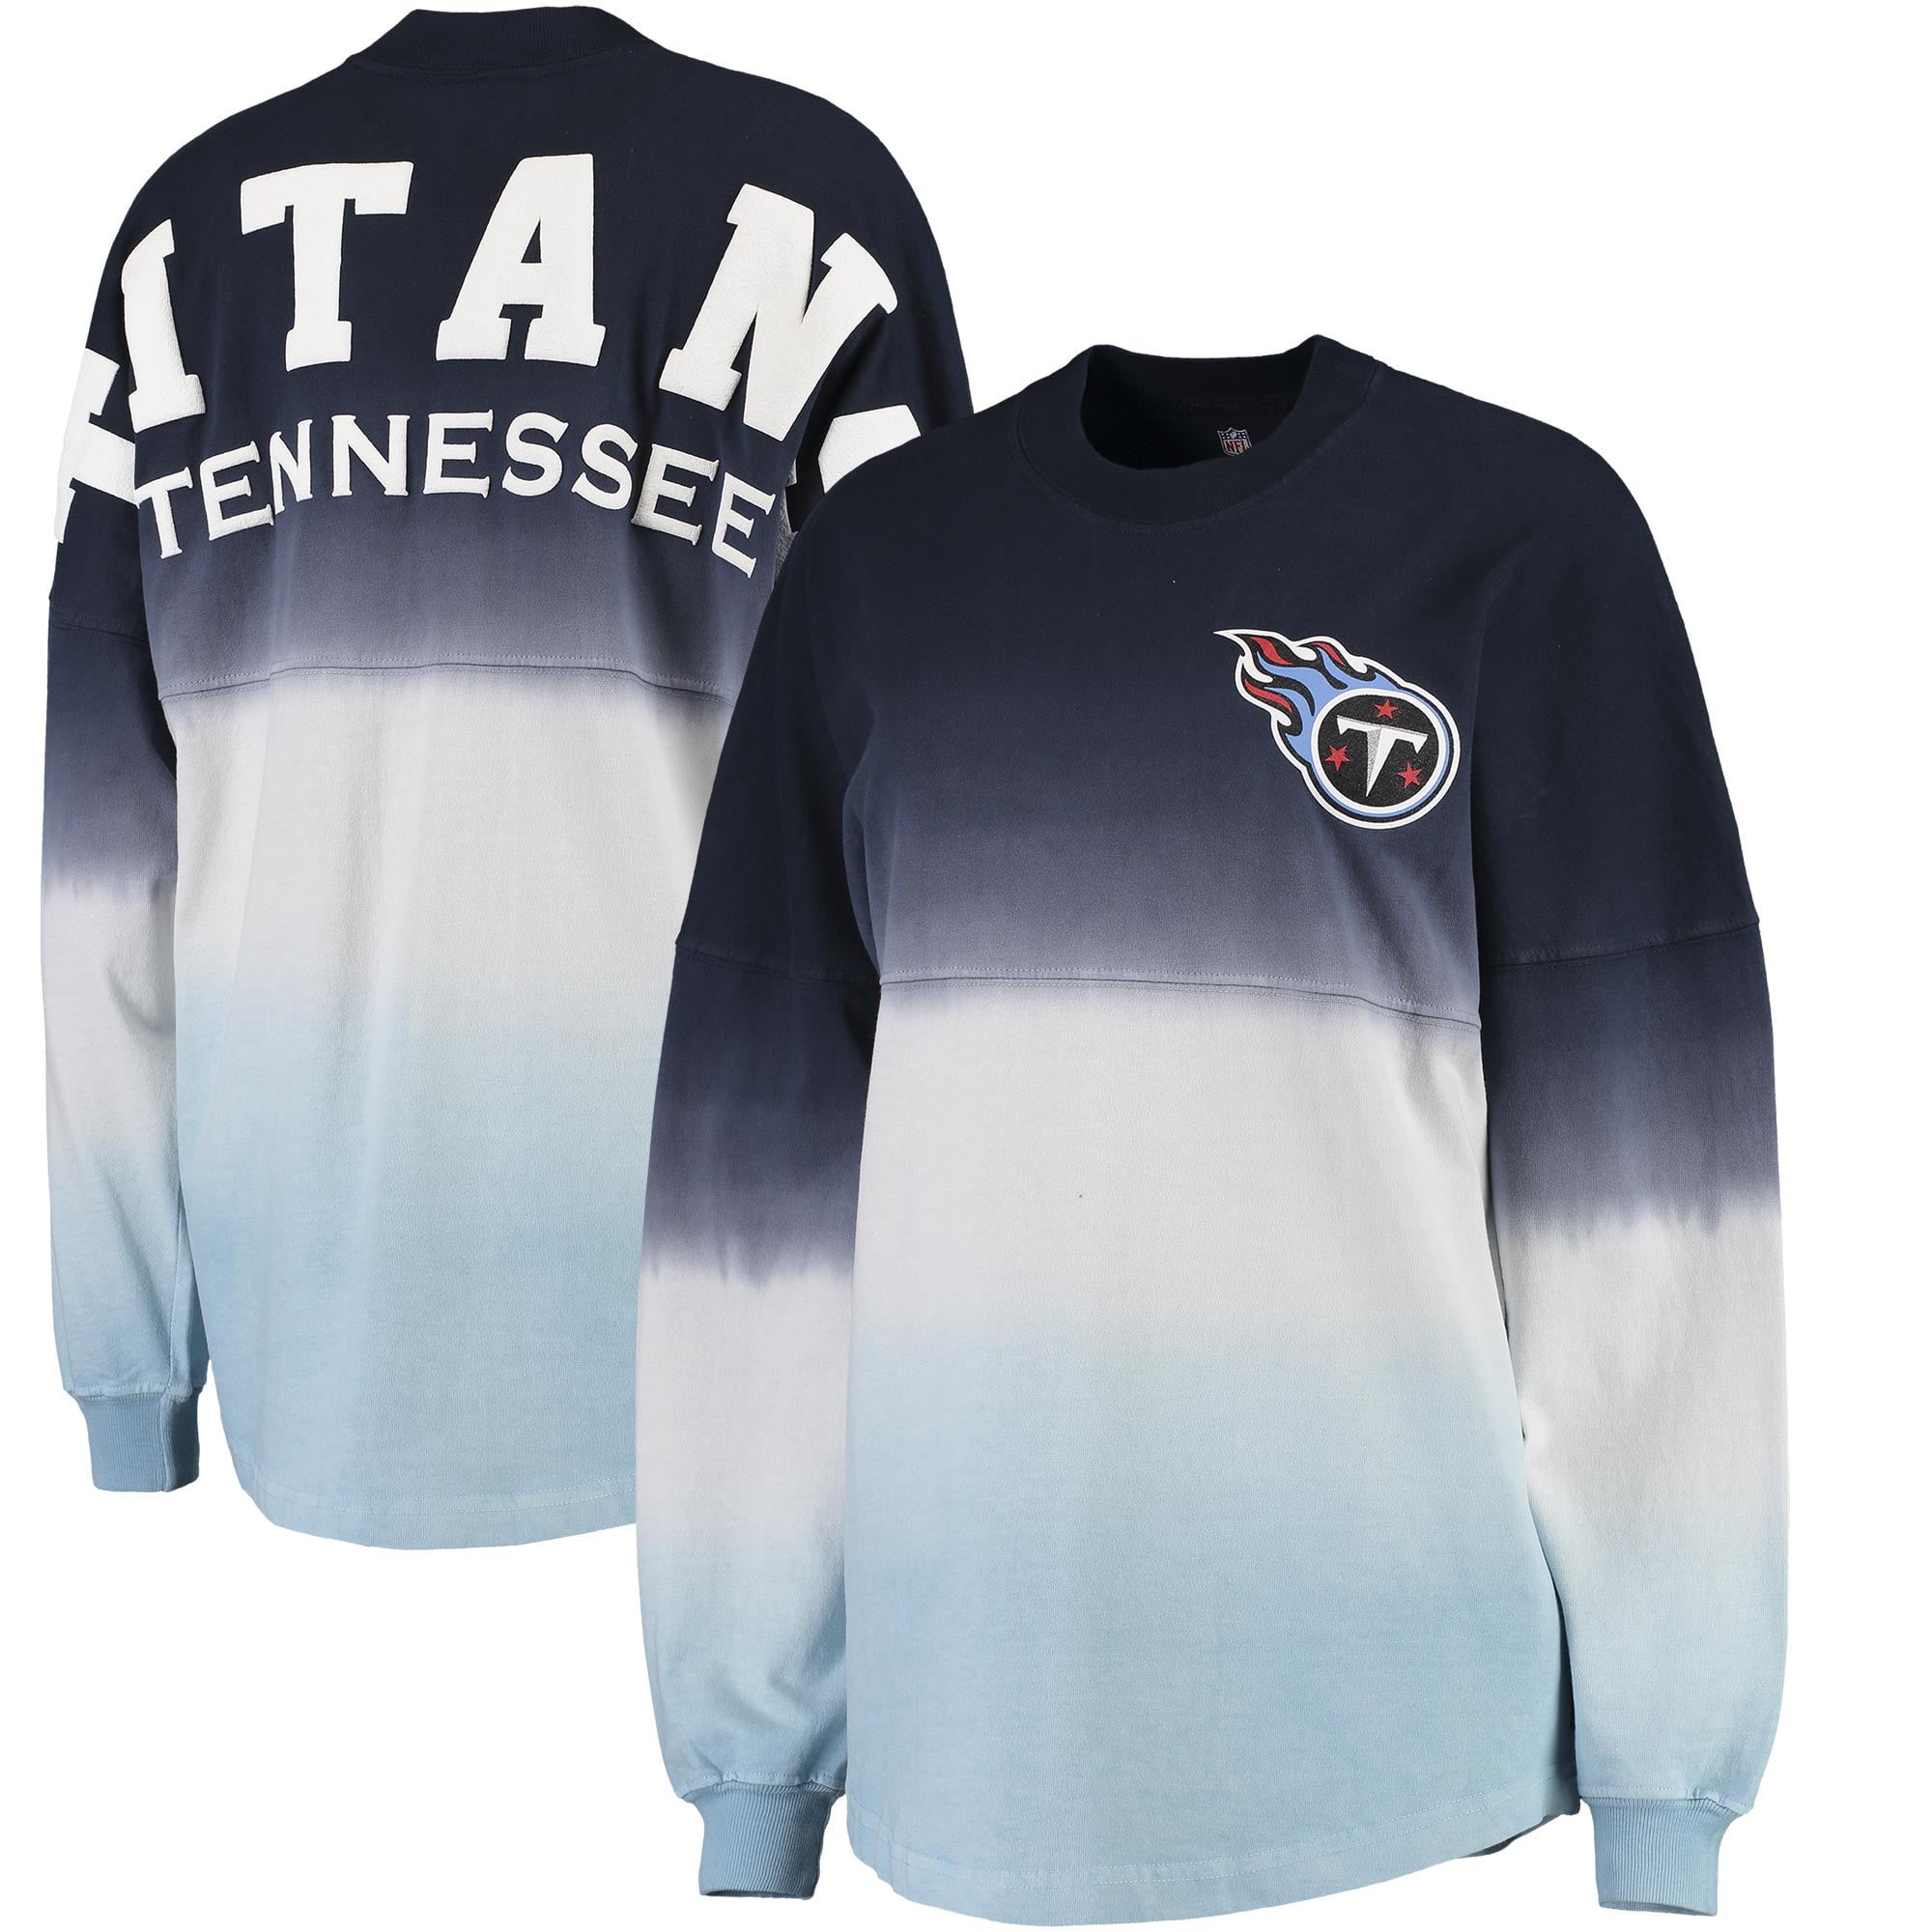 Tennessee Titans NFL Pro Line by 